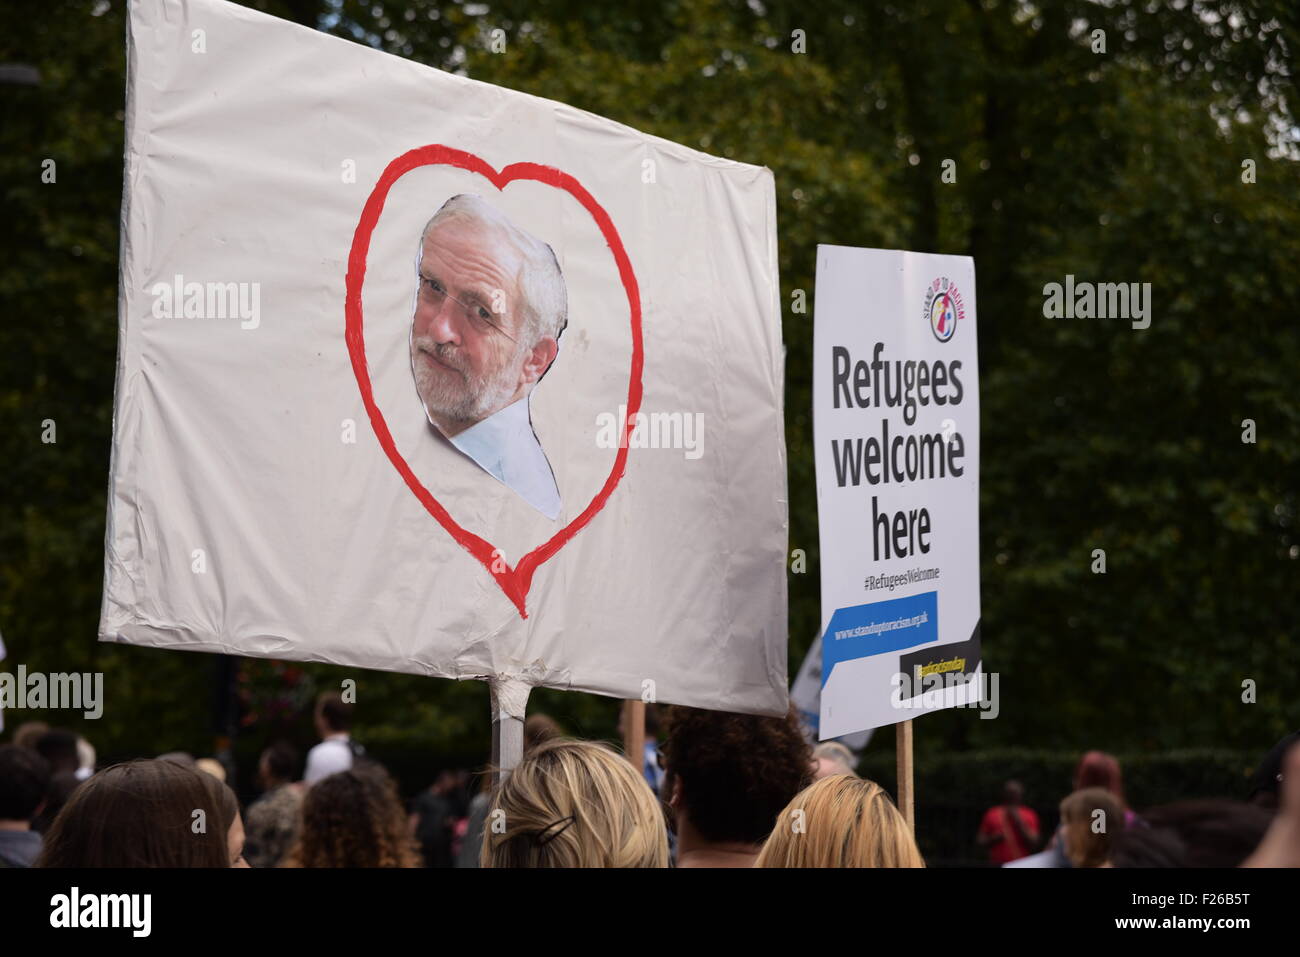 London, UK. 12th Sep, 2015. Thousands march through central London on a demonstration to say "refugees welcome here". Stock Photo